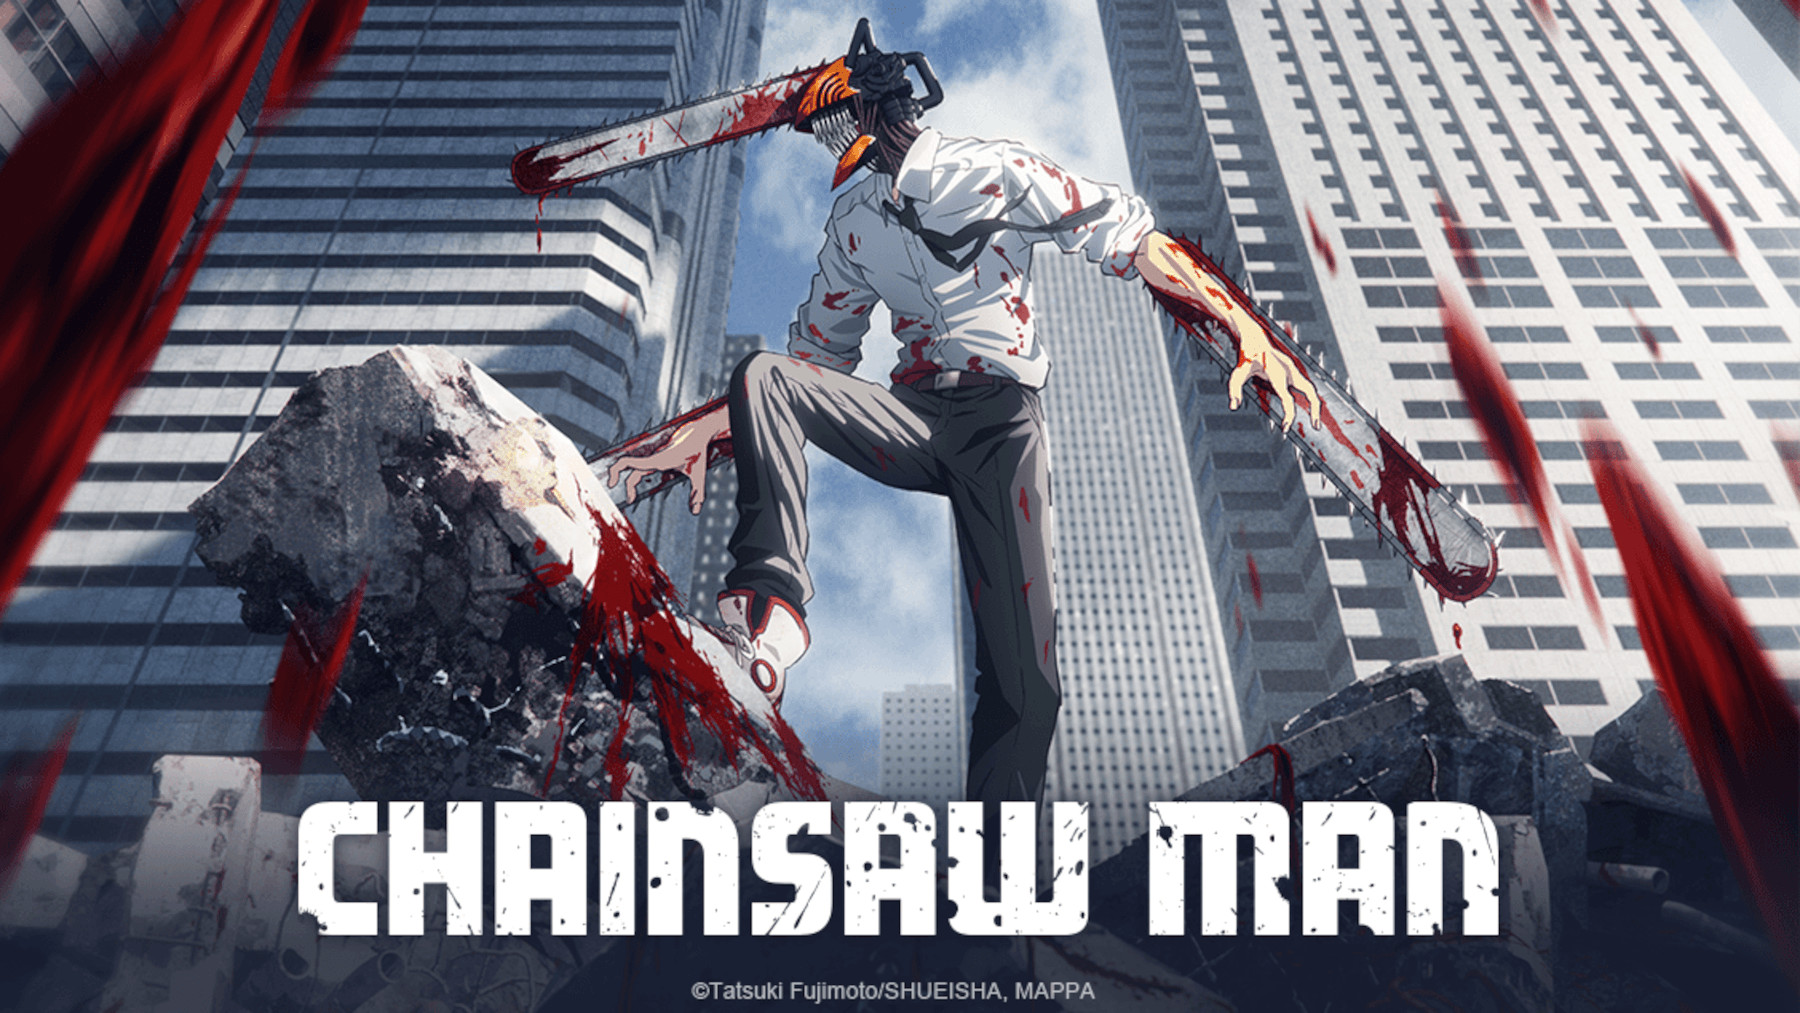 When Does 'Chainsaw Man' Anime Premiere? — Release Date Details